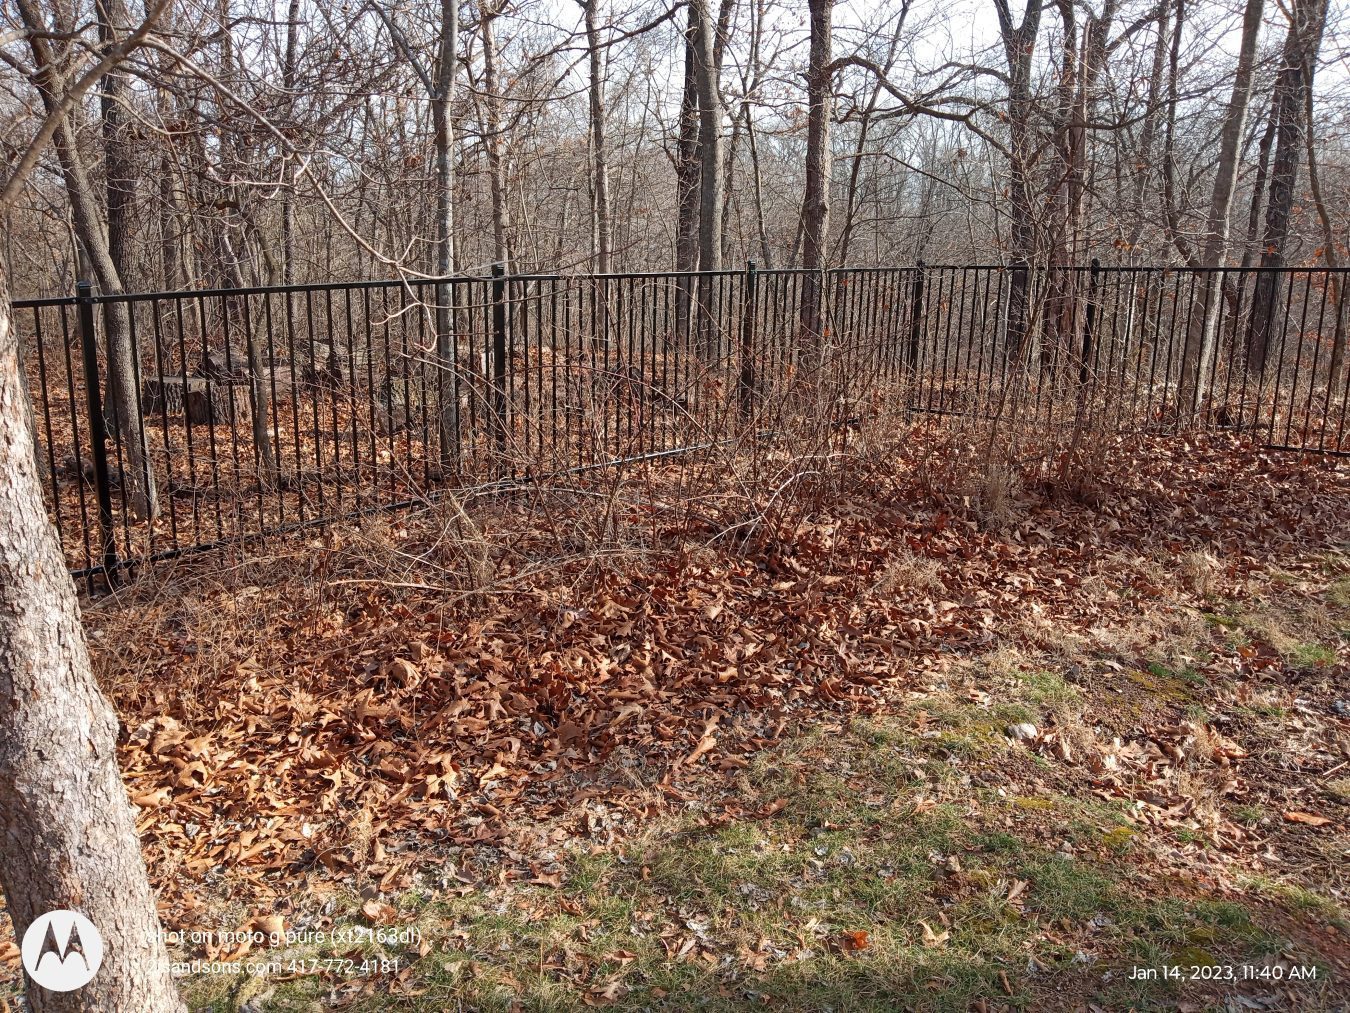 Leaves mound by fence